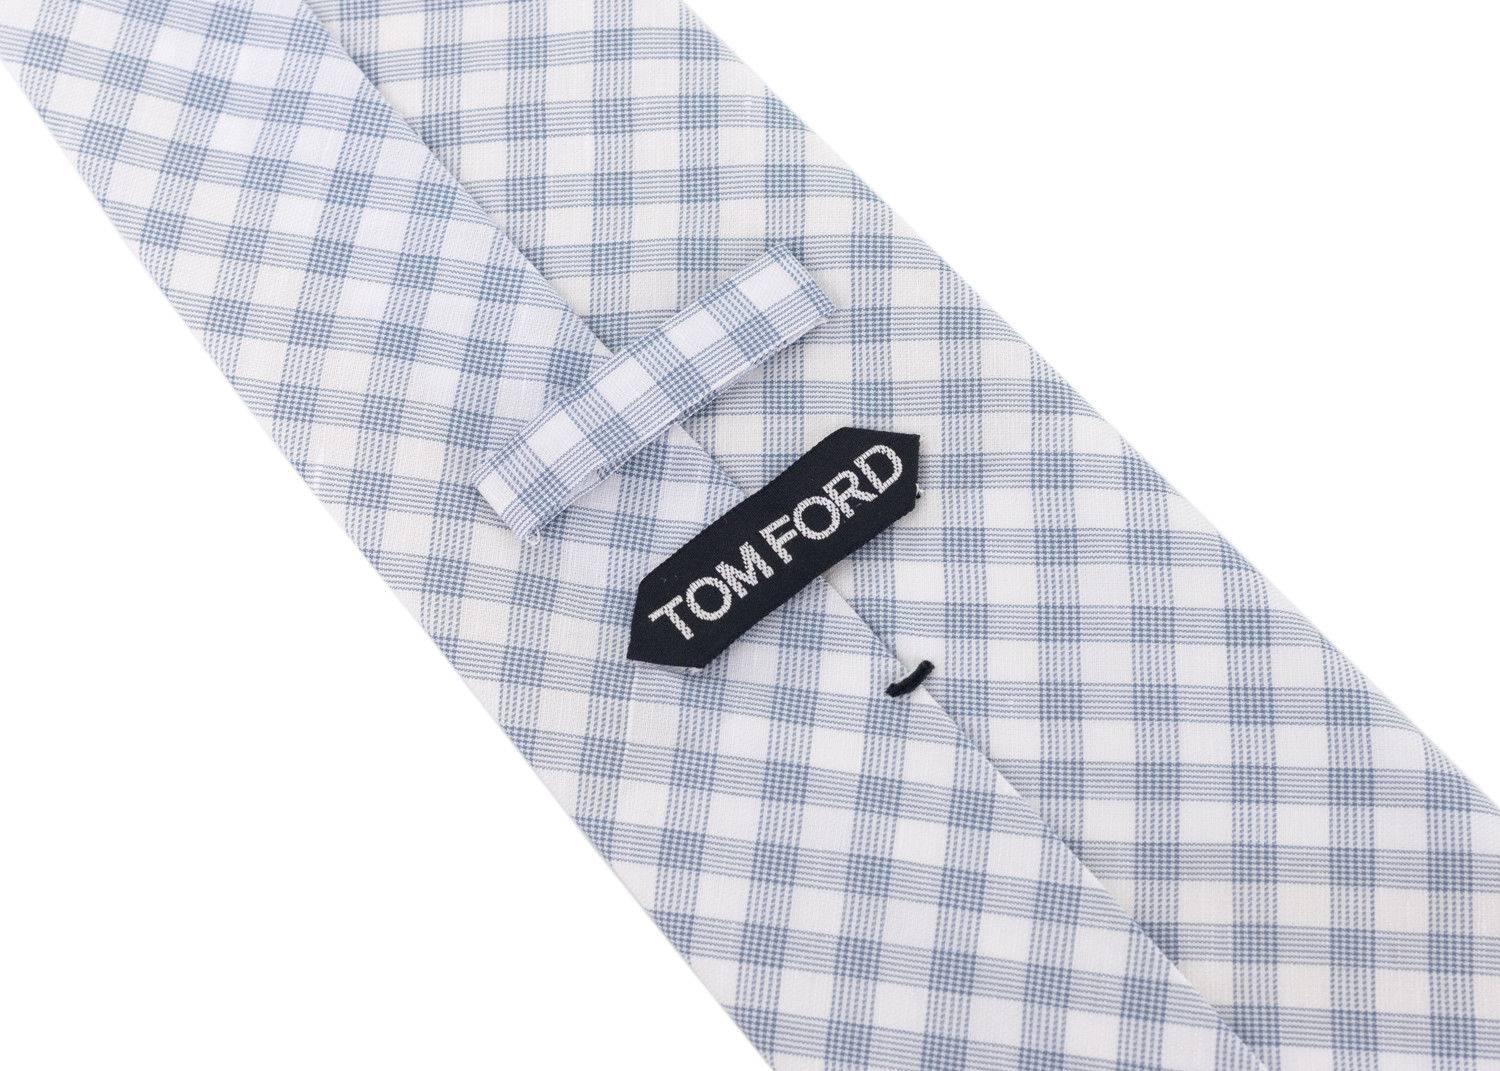 talian luxury brand, Tom Ford, has crafted these gorgeous Cotton Blend Tie for important special occasions and professional events. The tie is great to pair with your favorite solid color button down and blazers with your chosen pair or classic